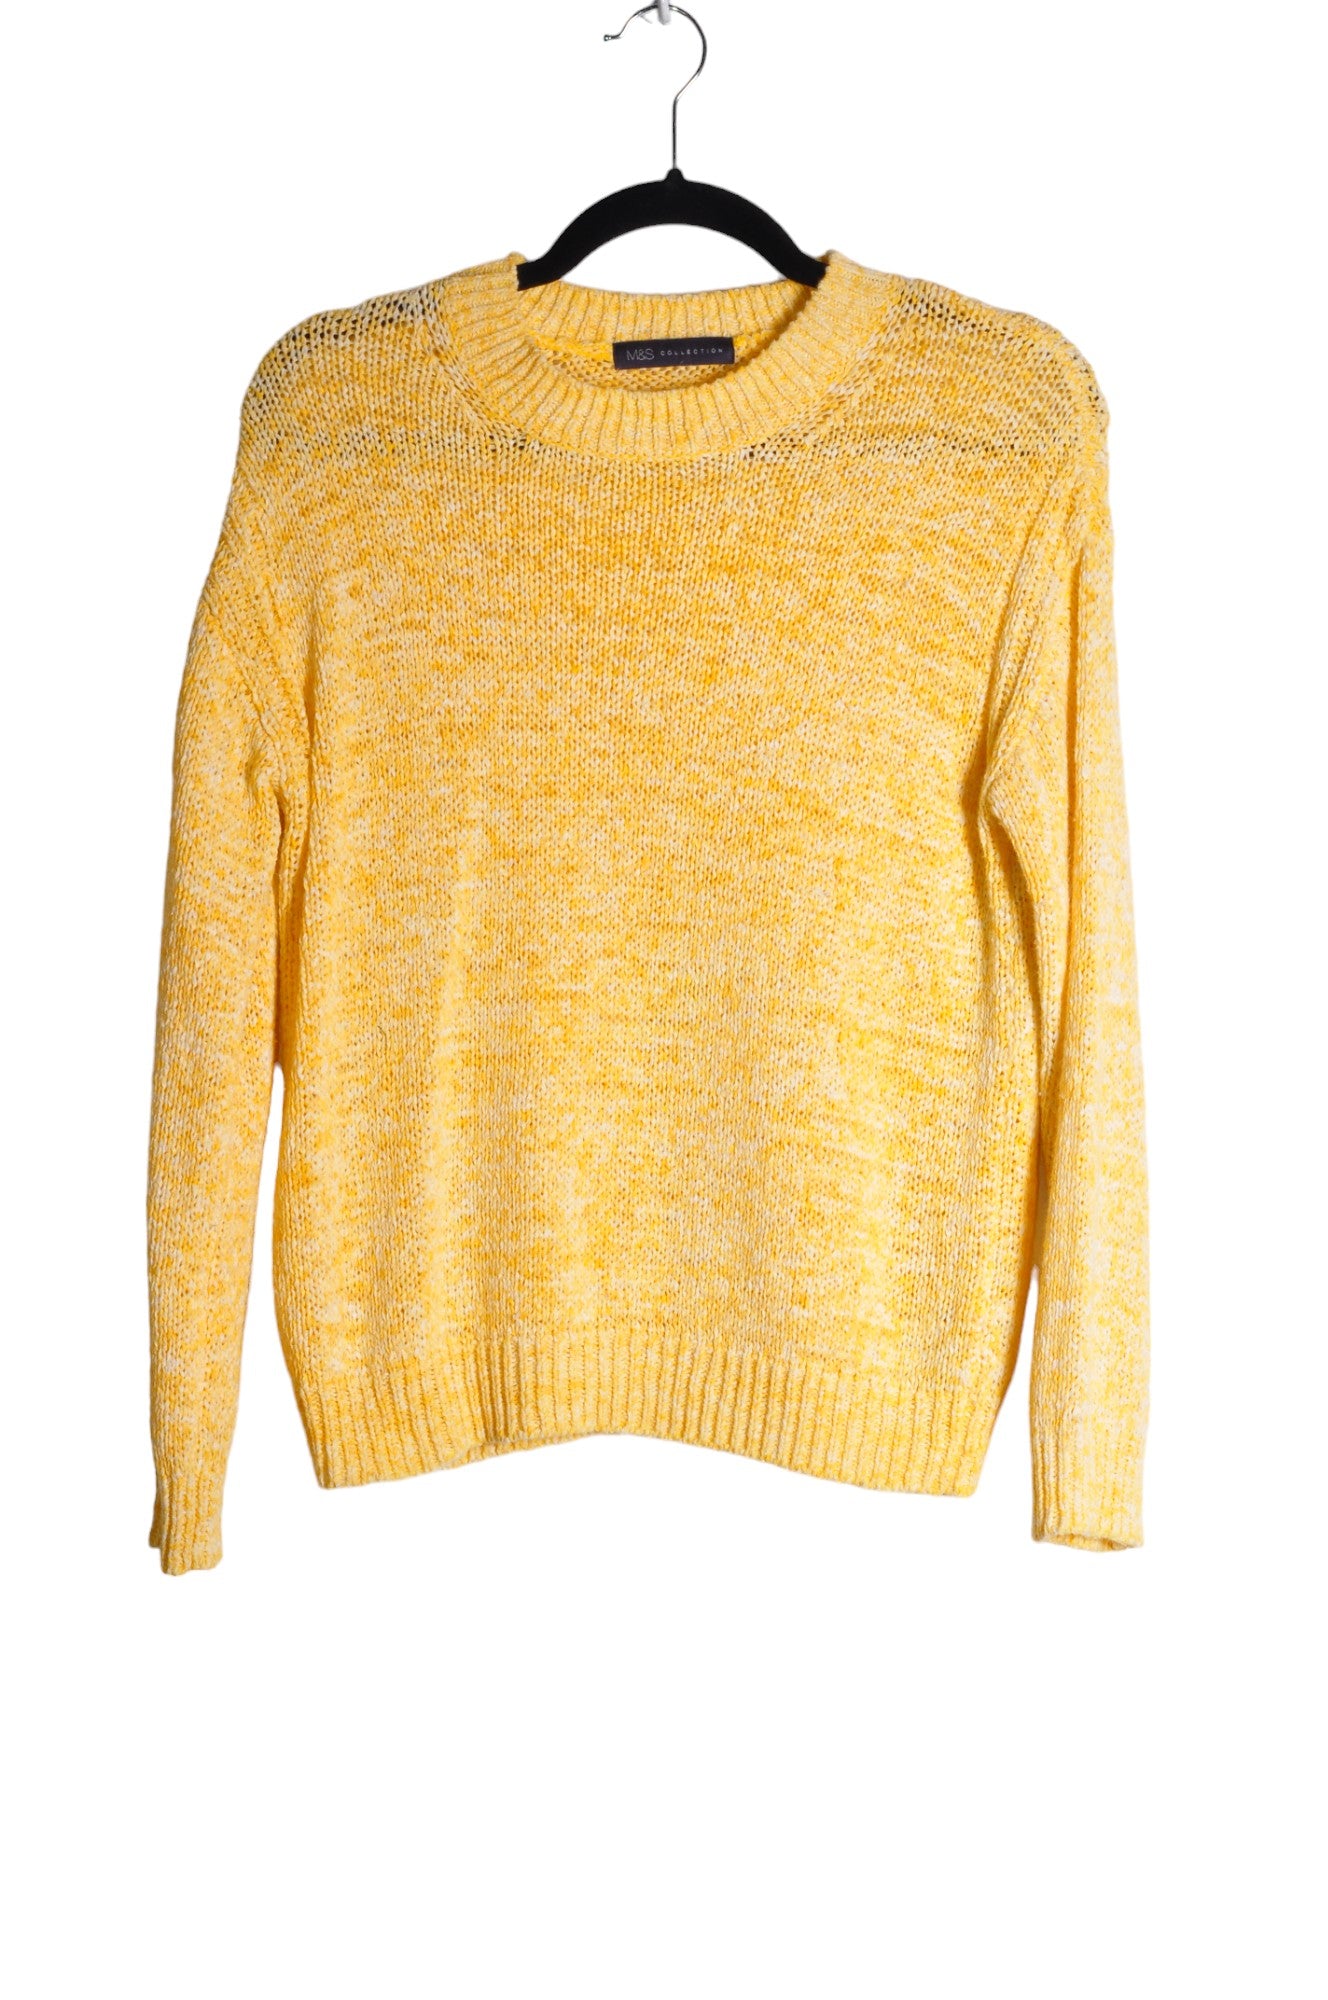 M&S COLLECTION Women Knit Tops Regular fit in Yellow - Size S | 4.79 $ KOOP